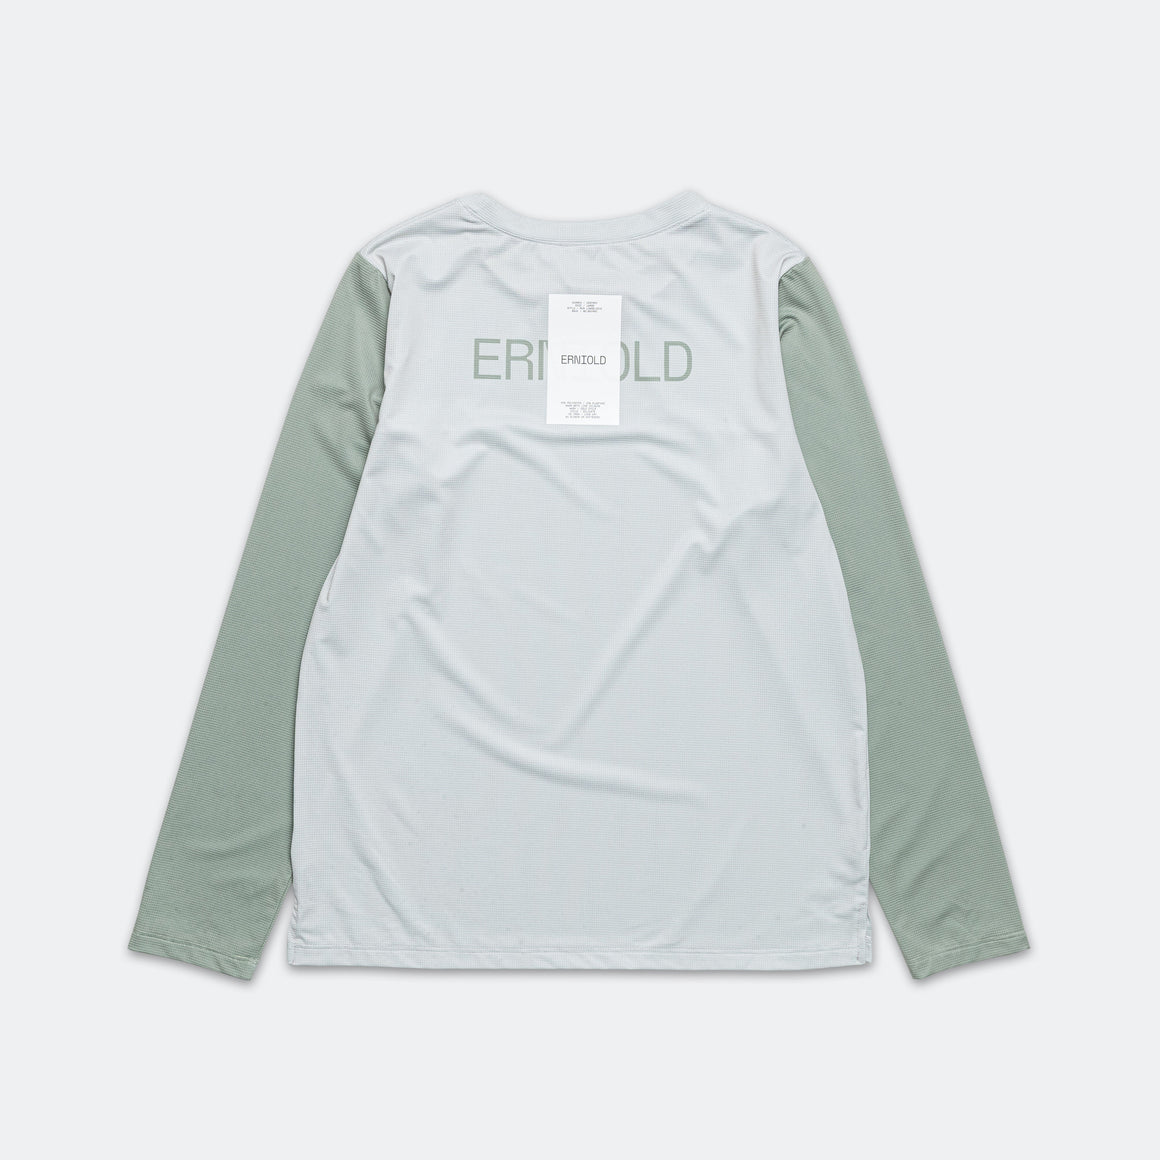 Erniold - Mens Run L/S Tee - Light Moss - Up There Athletics